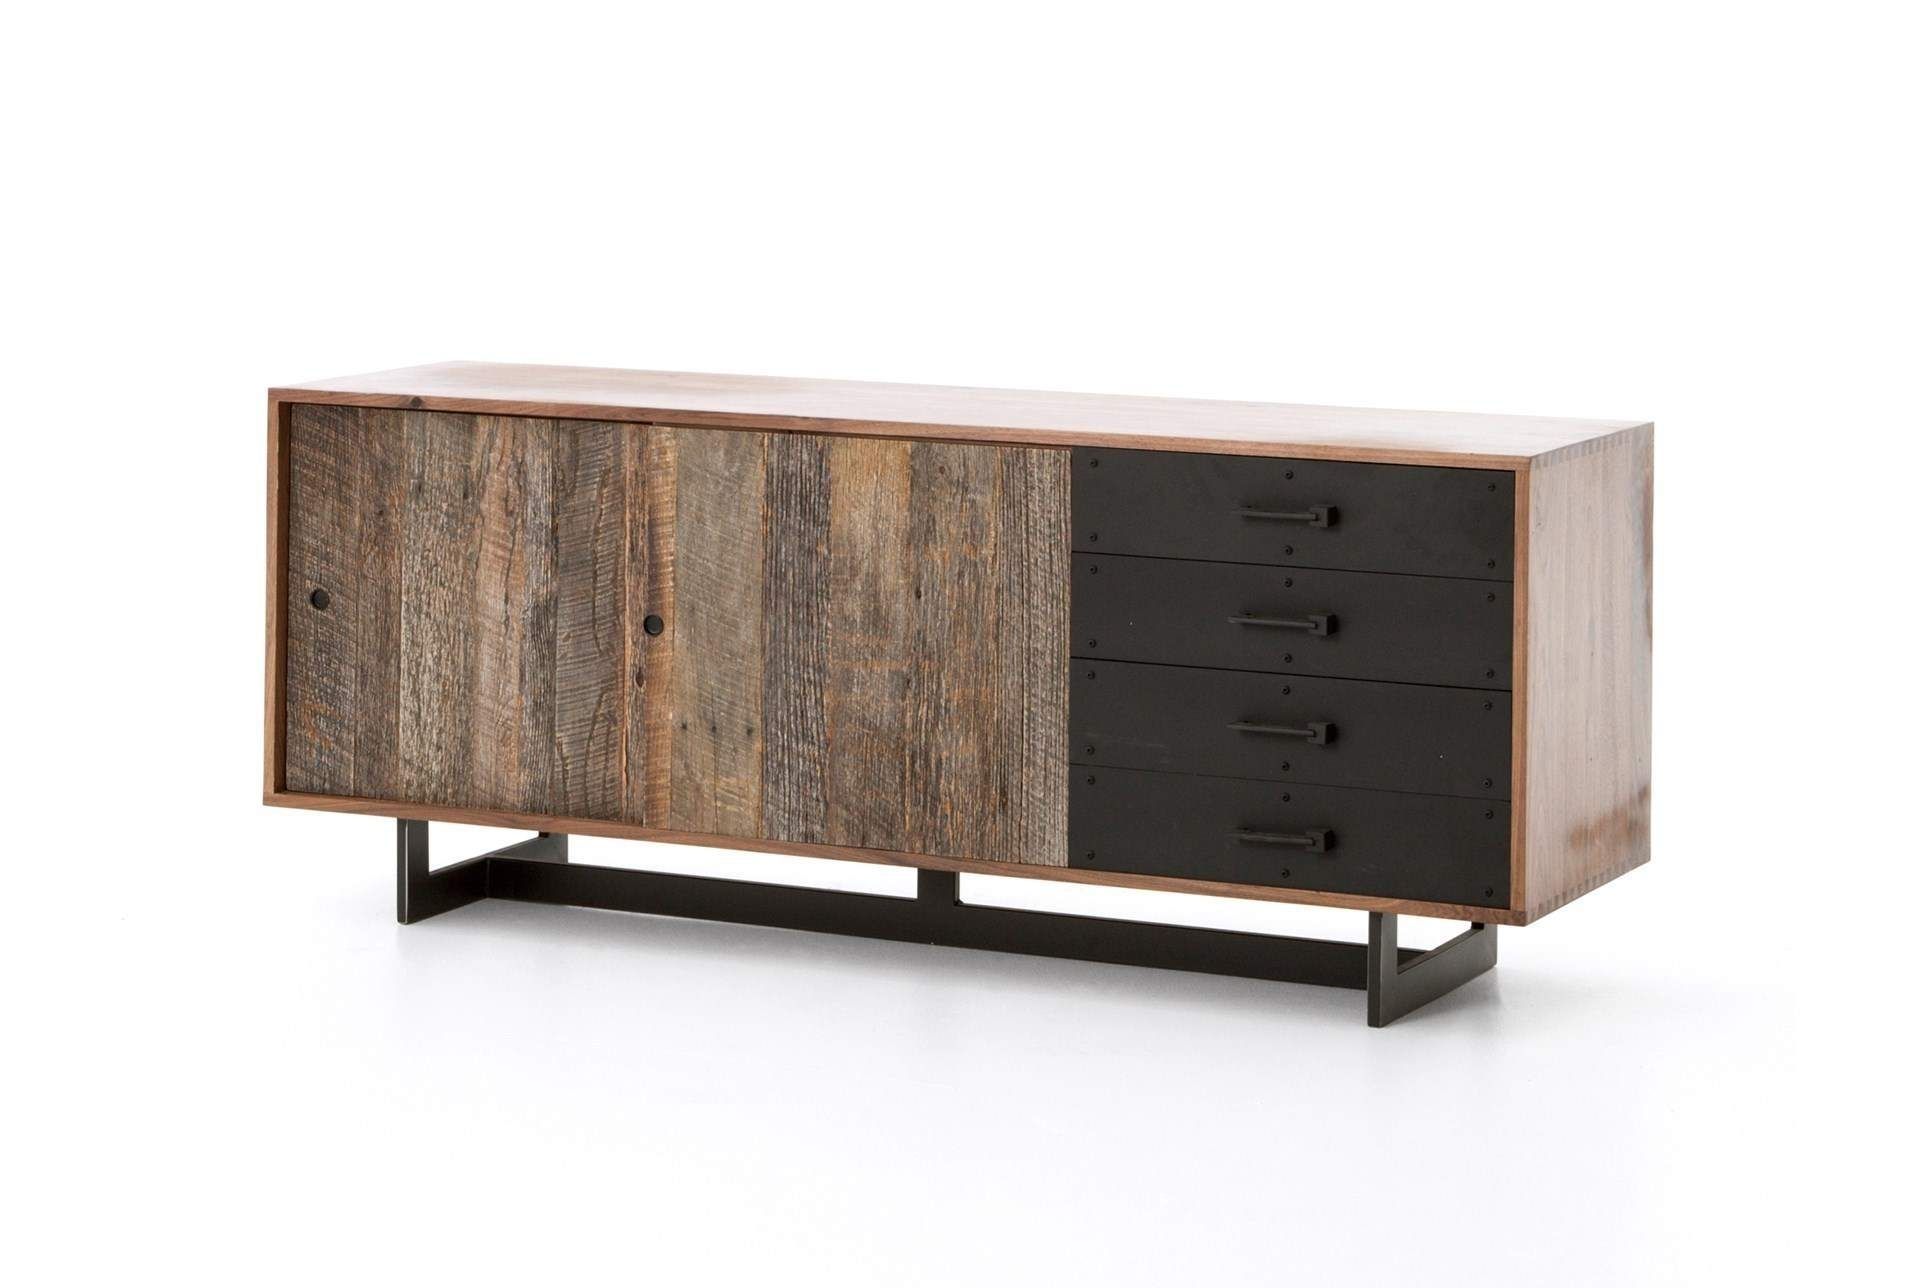 Shop For Mikelson Sideboard At Livingspaces (View 4 of 30)